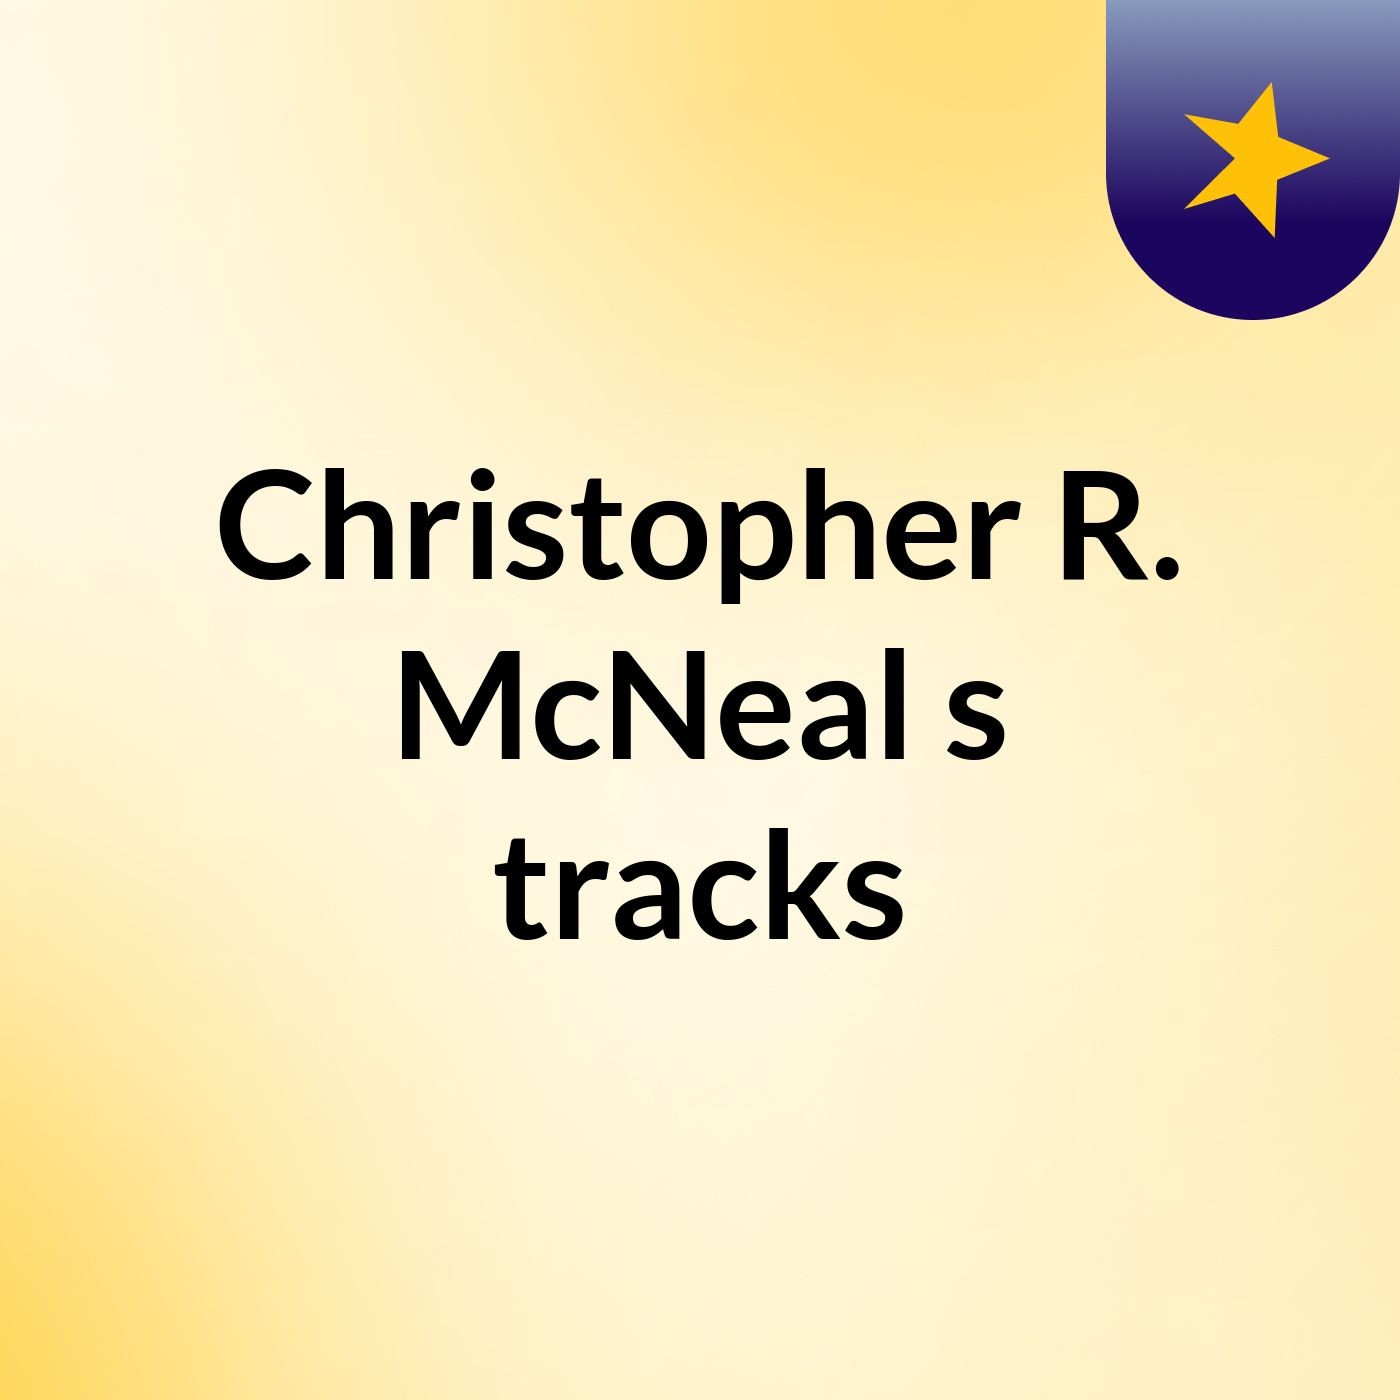 Christopher R. McNeal's tracks